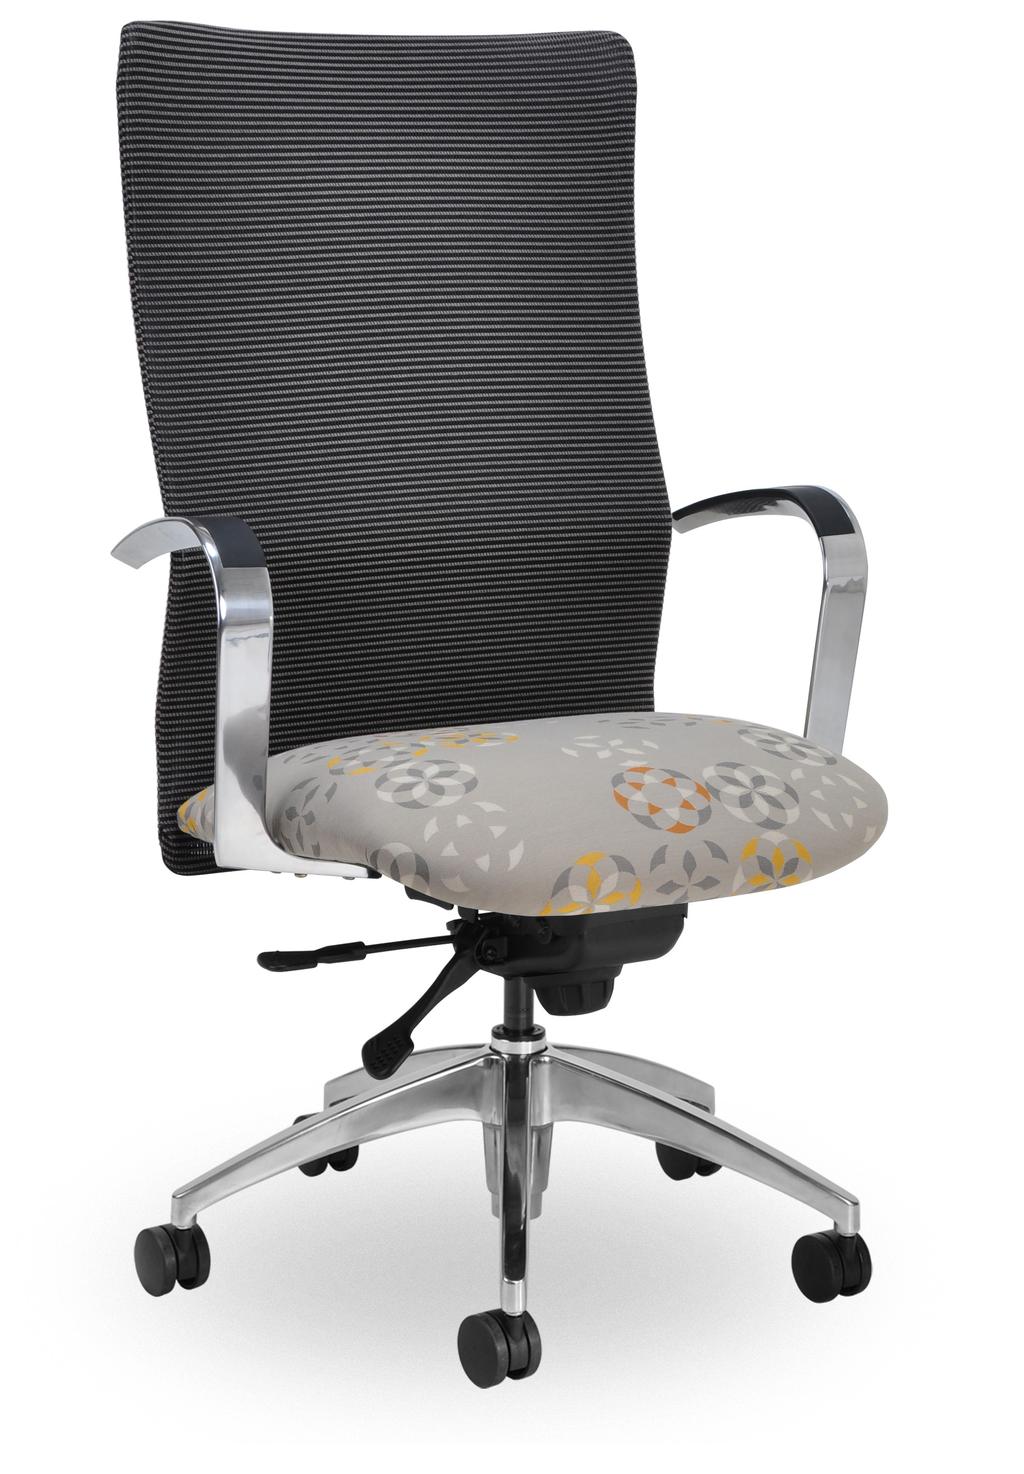 Pictured: Jay medium back work chair with polished aluminum arms, polished aluminum spider base, and upholstered back (JA201 E27 PAA